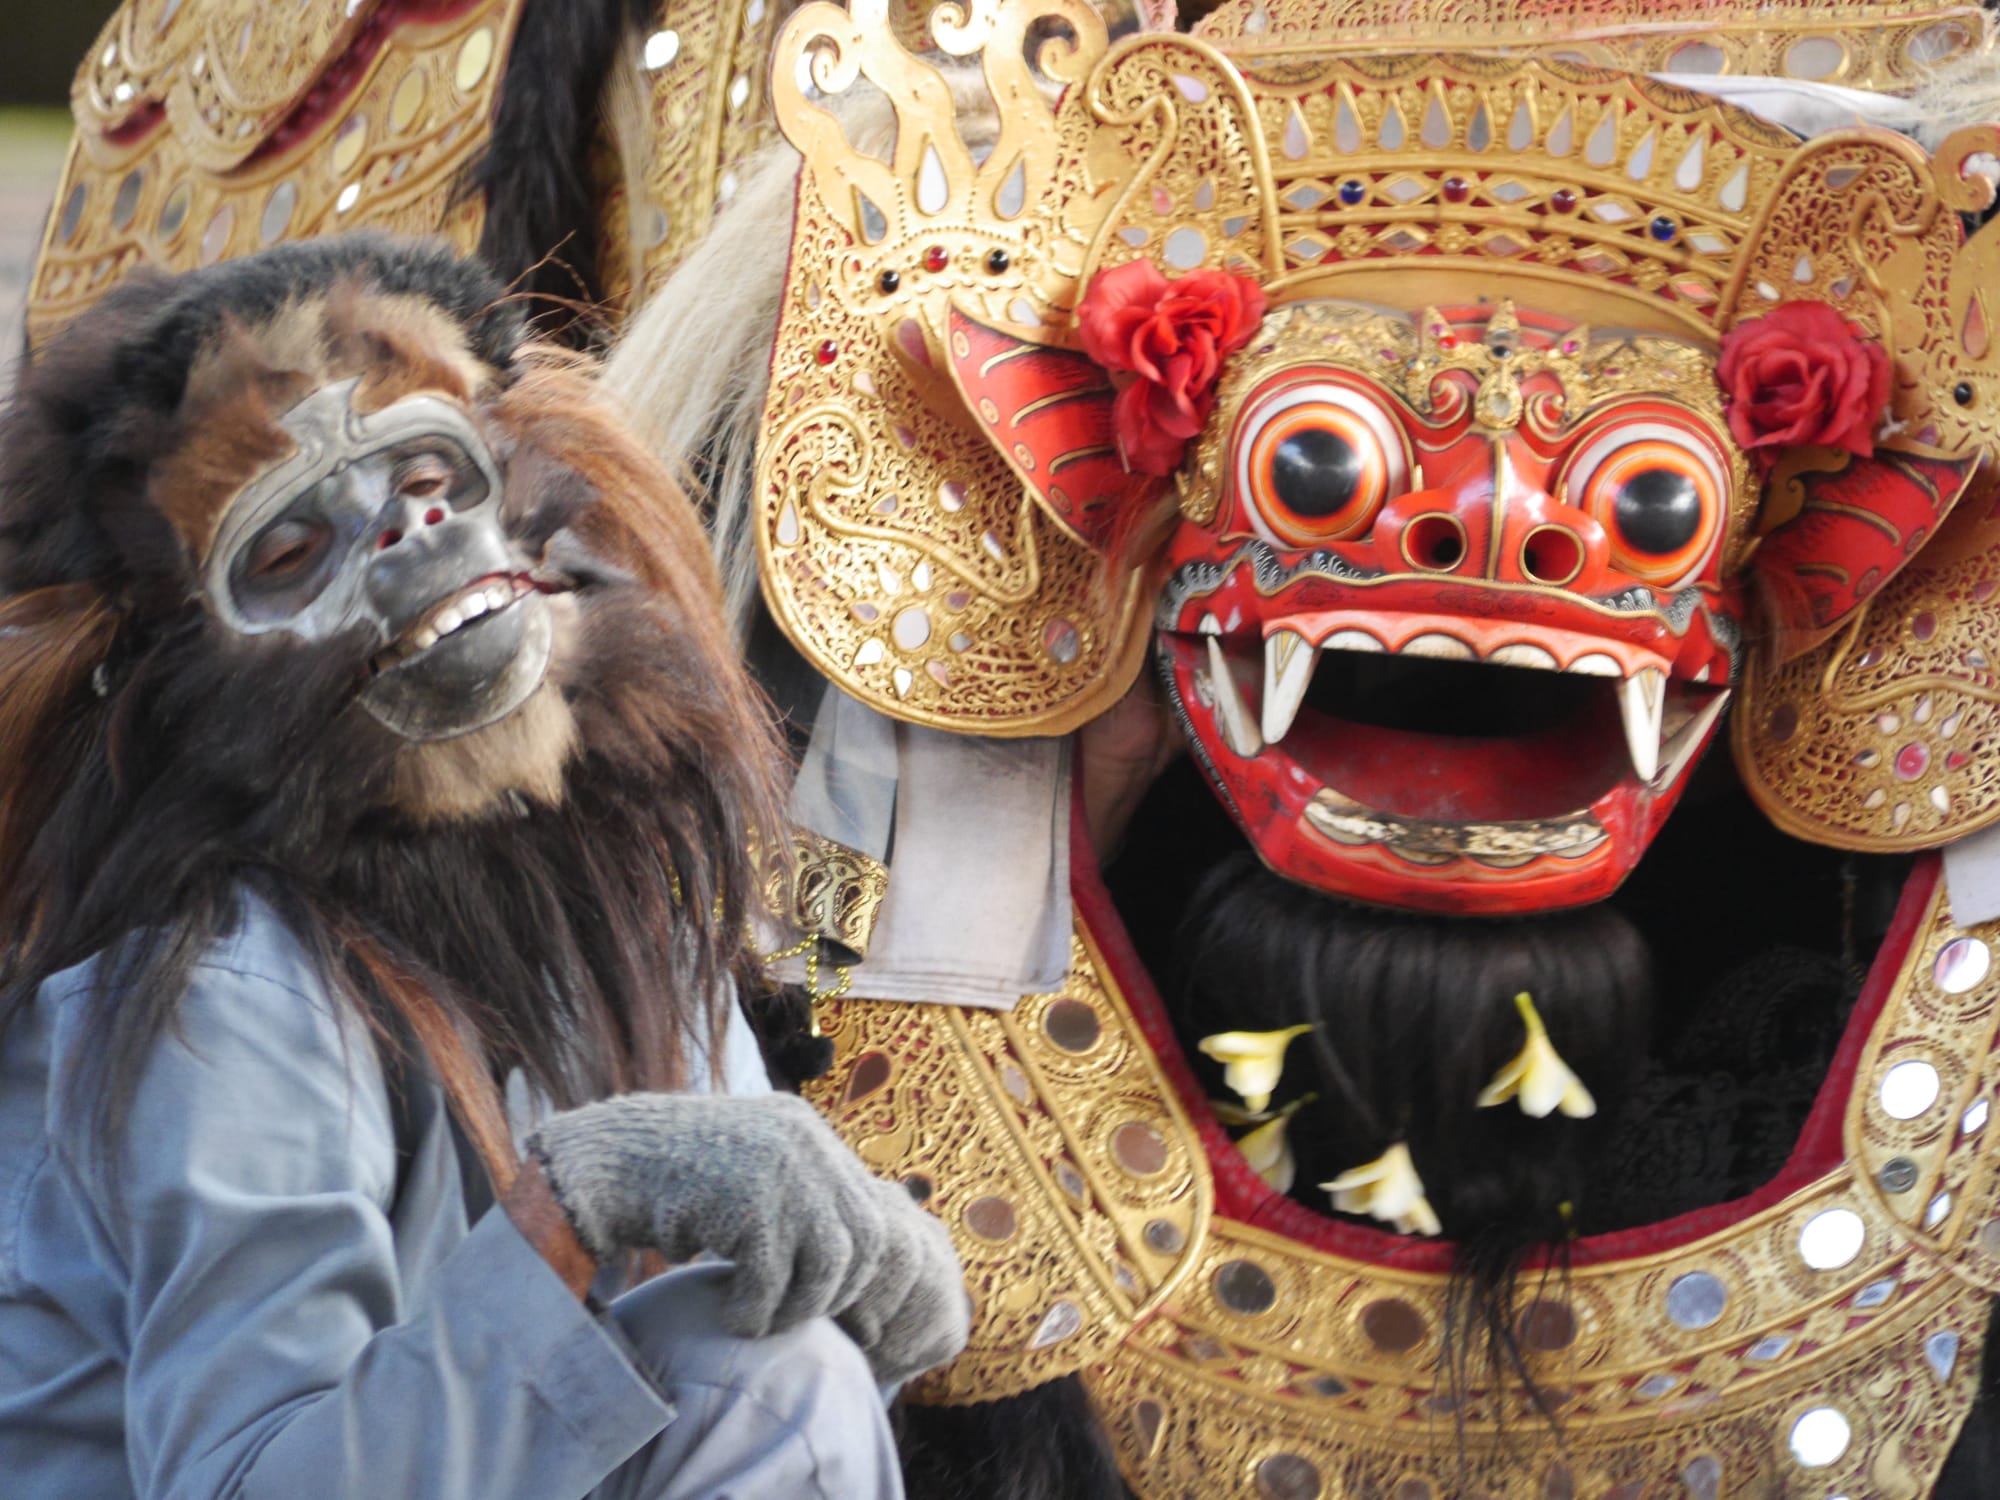 Photo by Author — the money and the tiger — Sahadewa Barong and Kris Dance, Bali, Indonesia